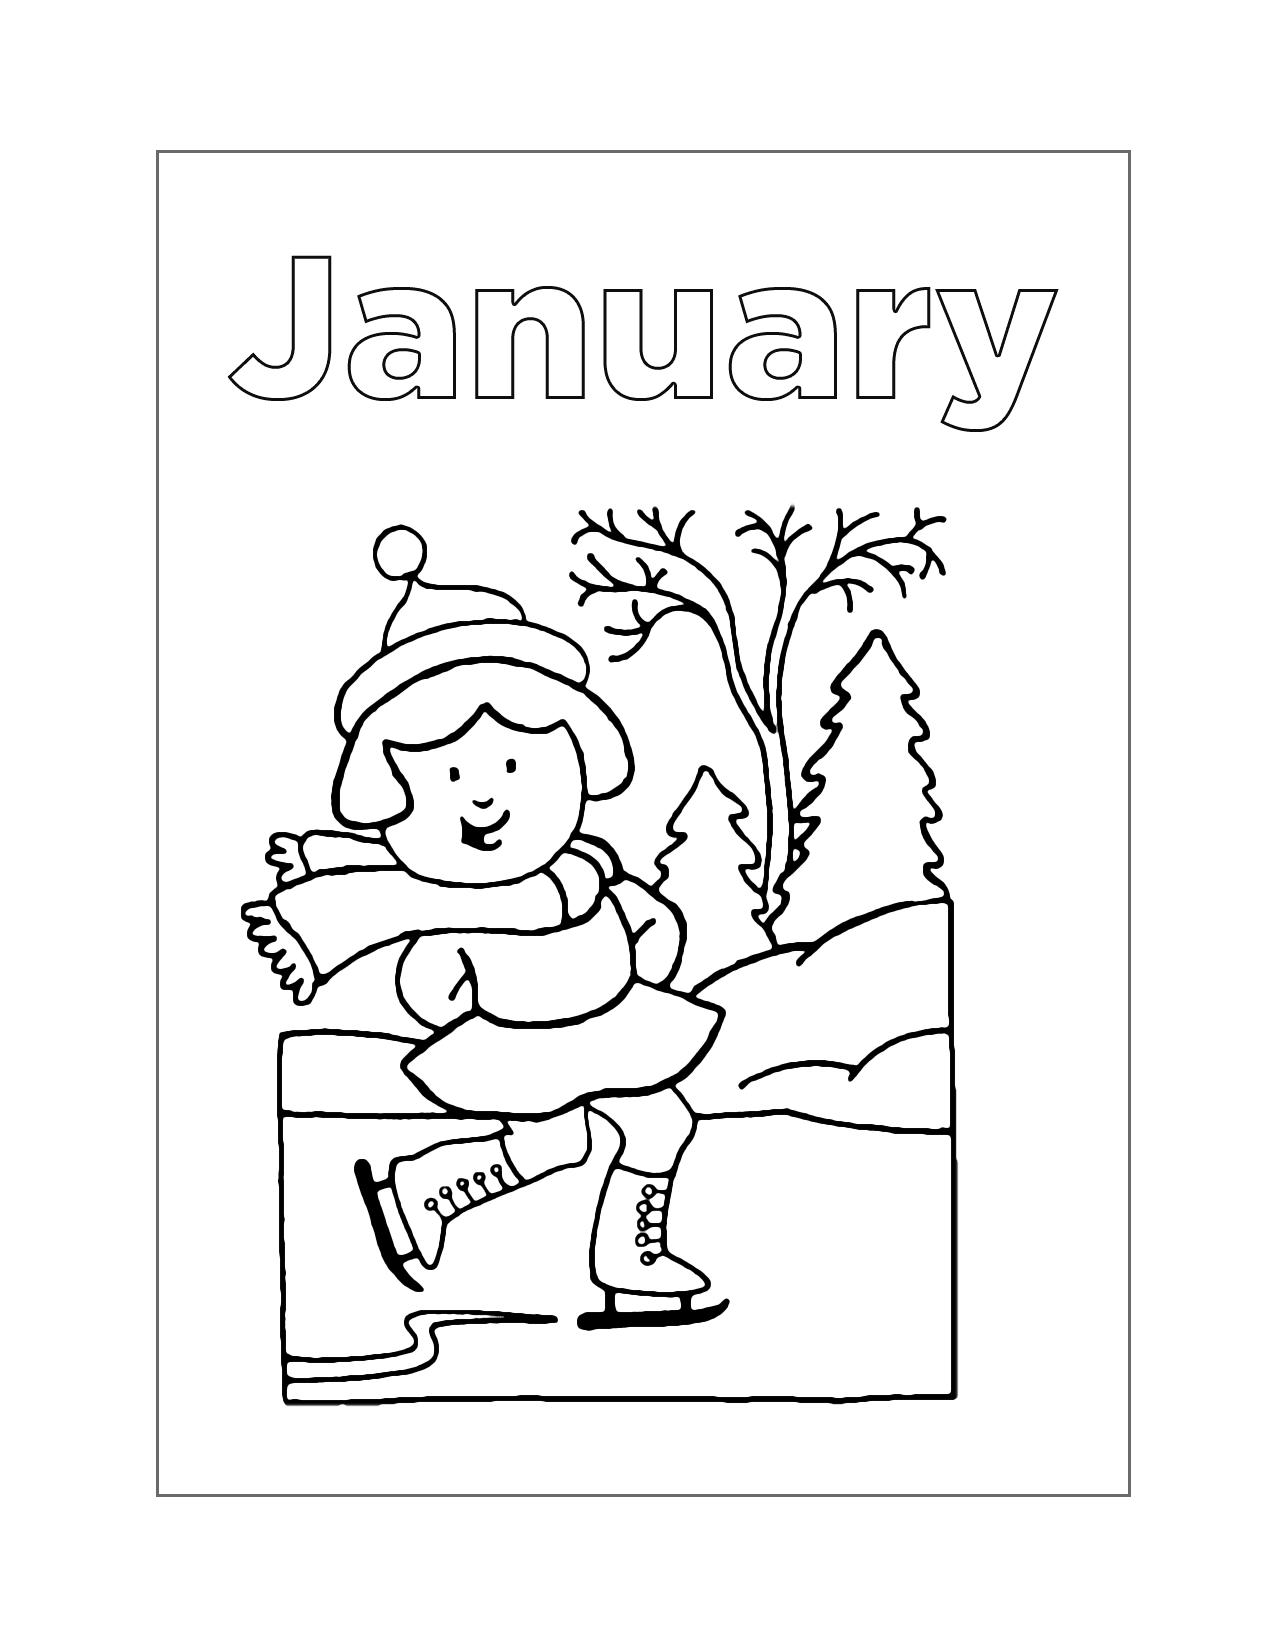 Ice Skating In January Coloring Page